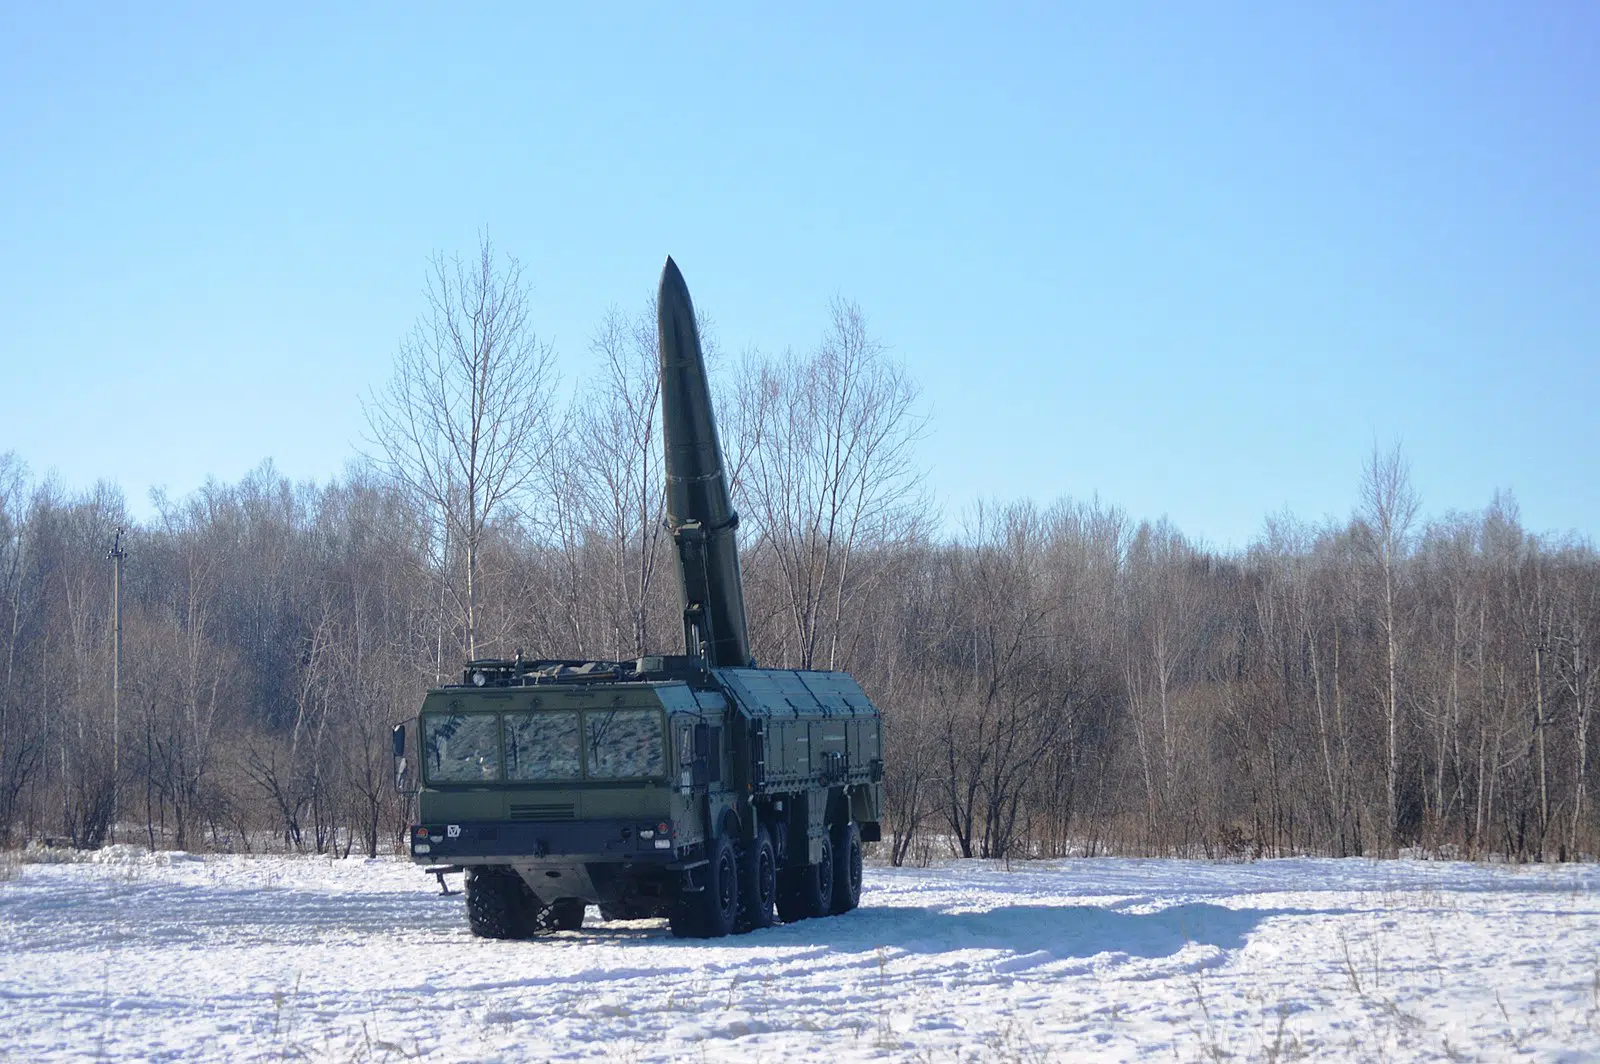 Russia's Iskander missile system